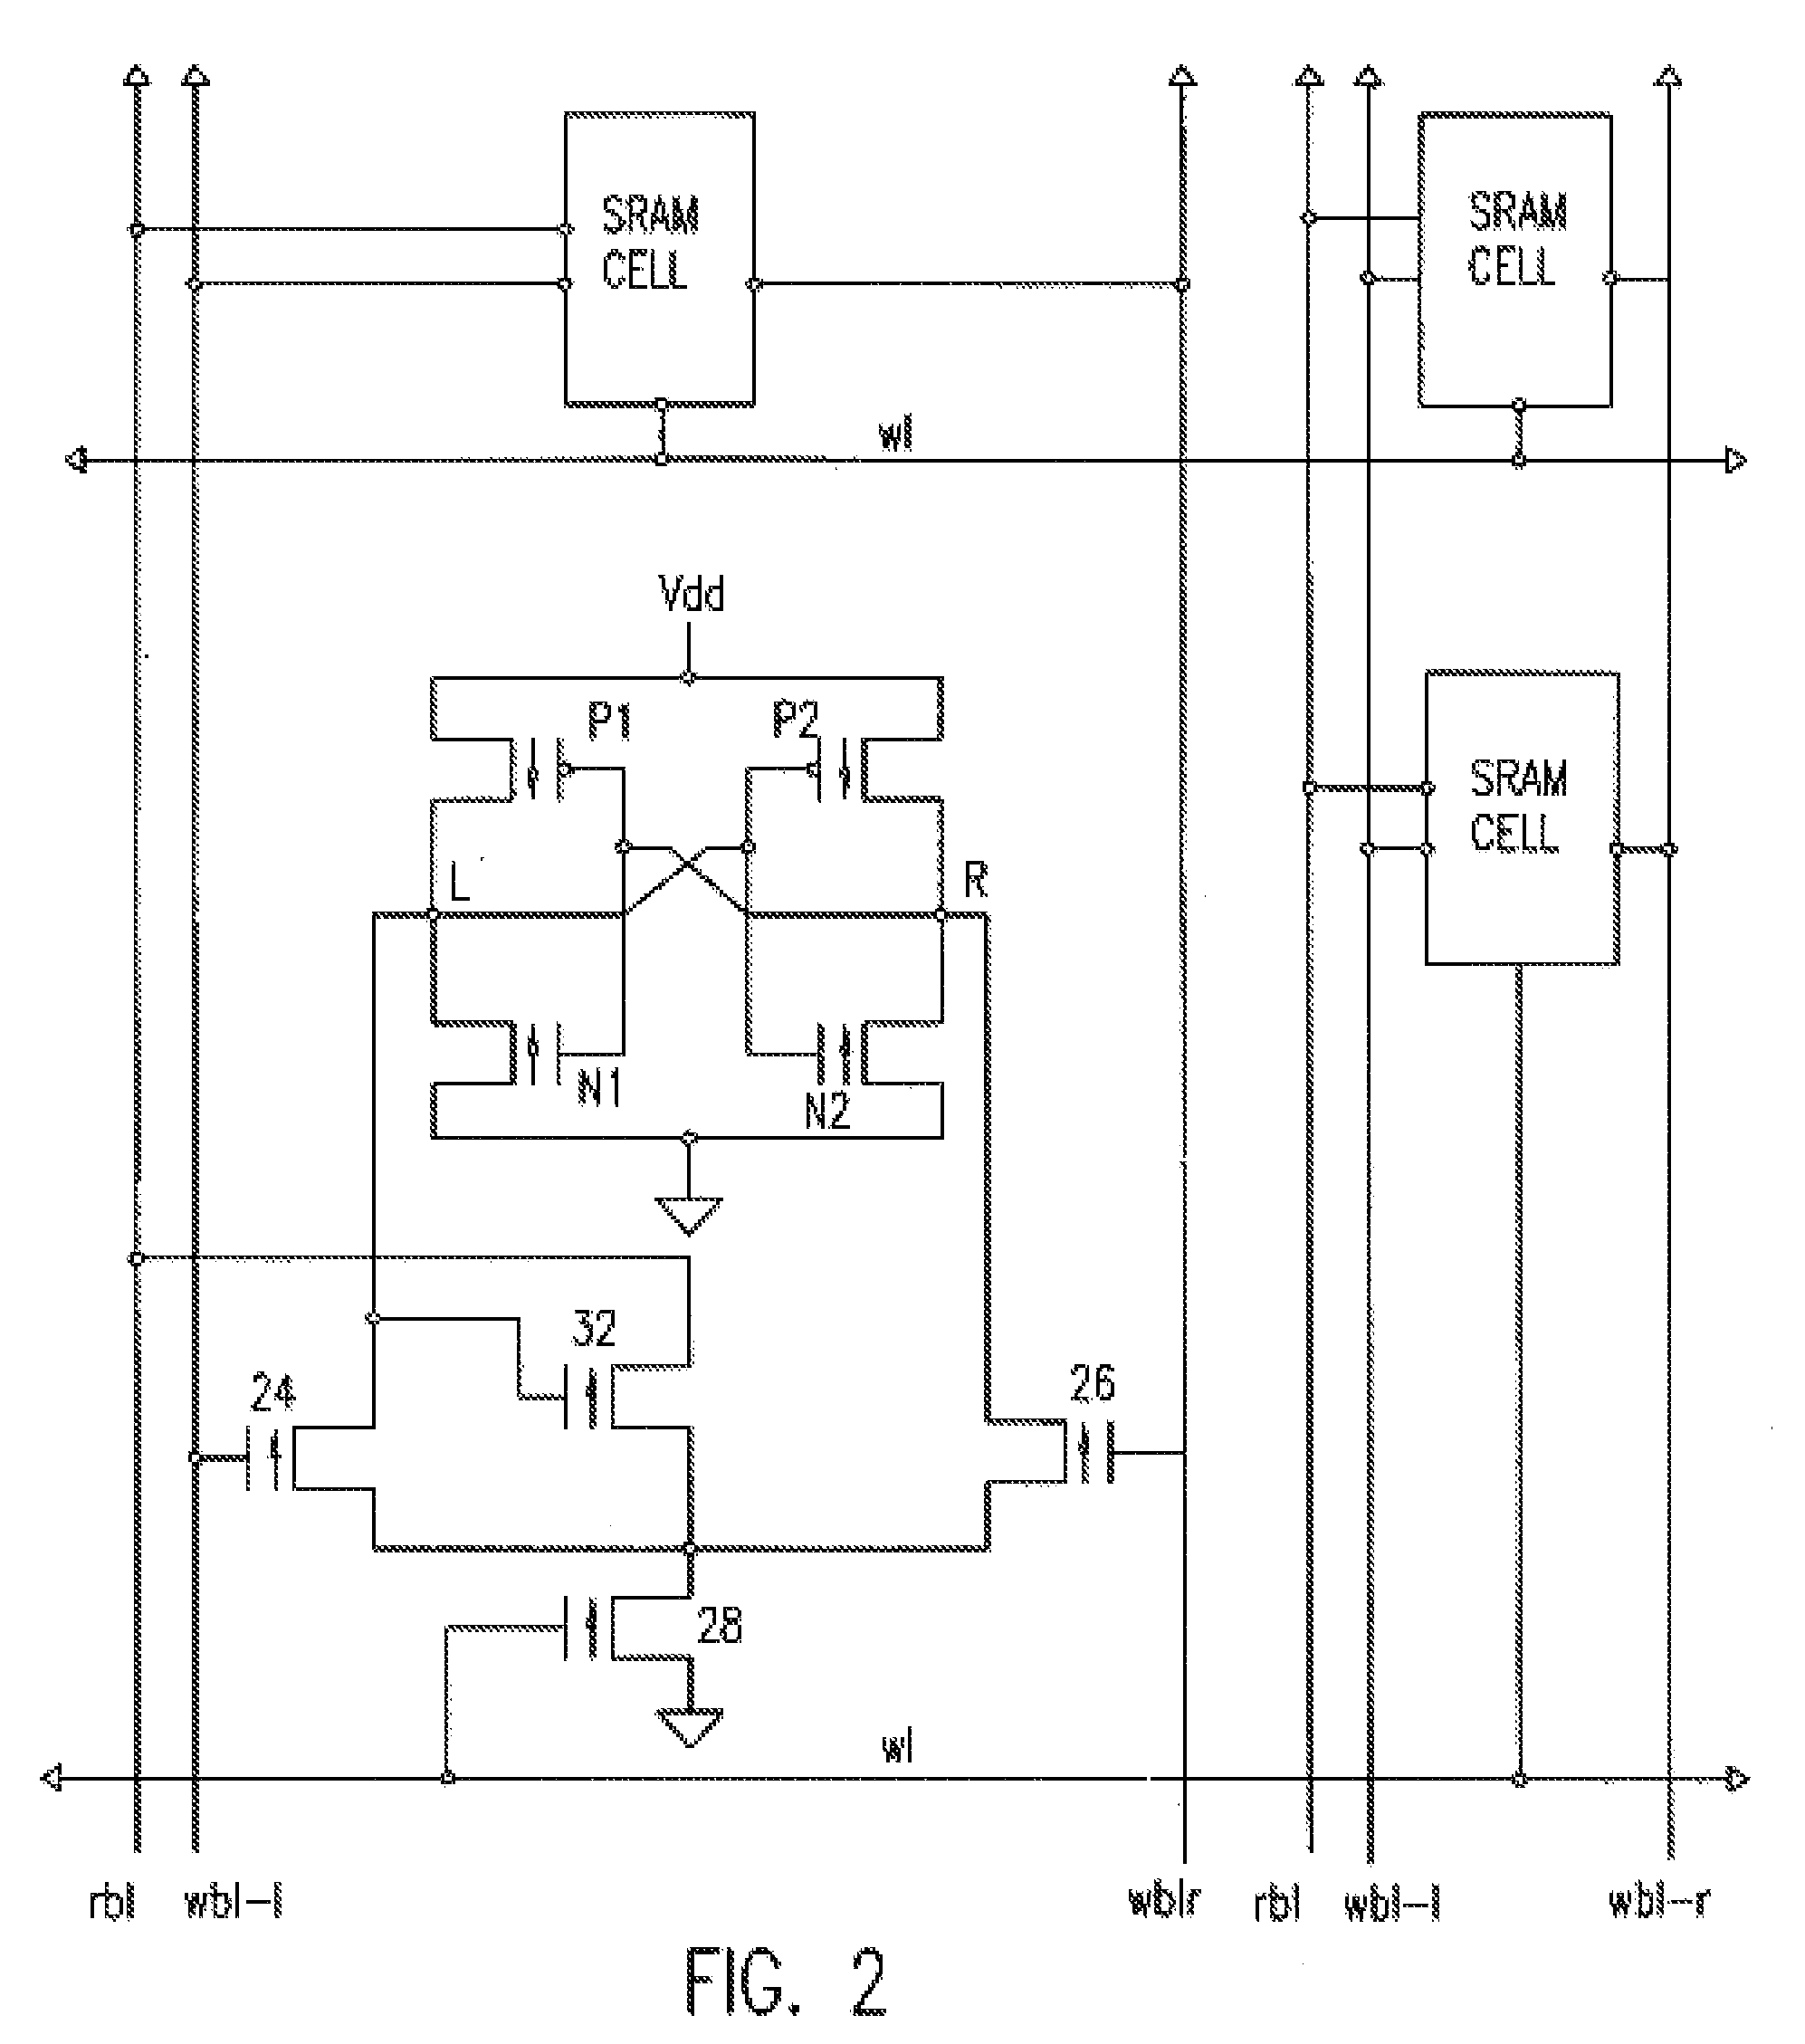 Eight Transistor SRAM Cell with Improved Stability Requiring Only One Word Line